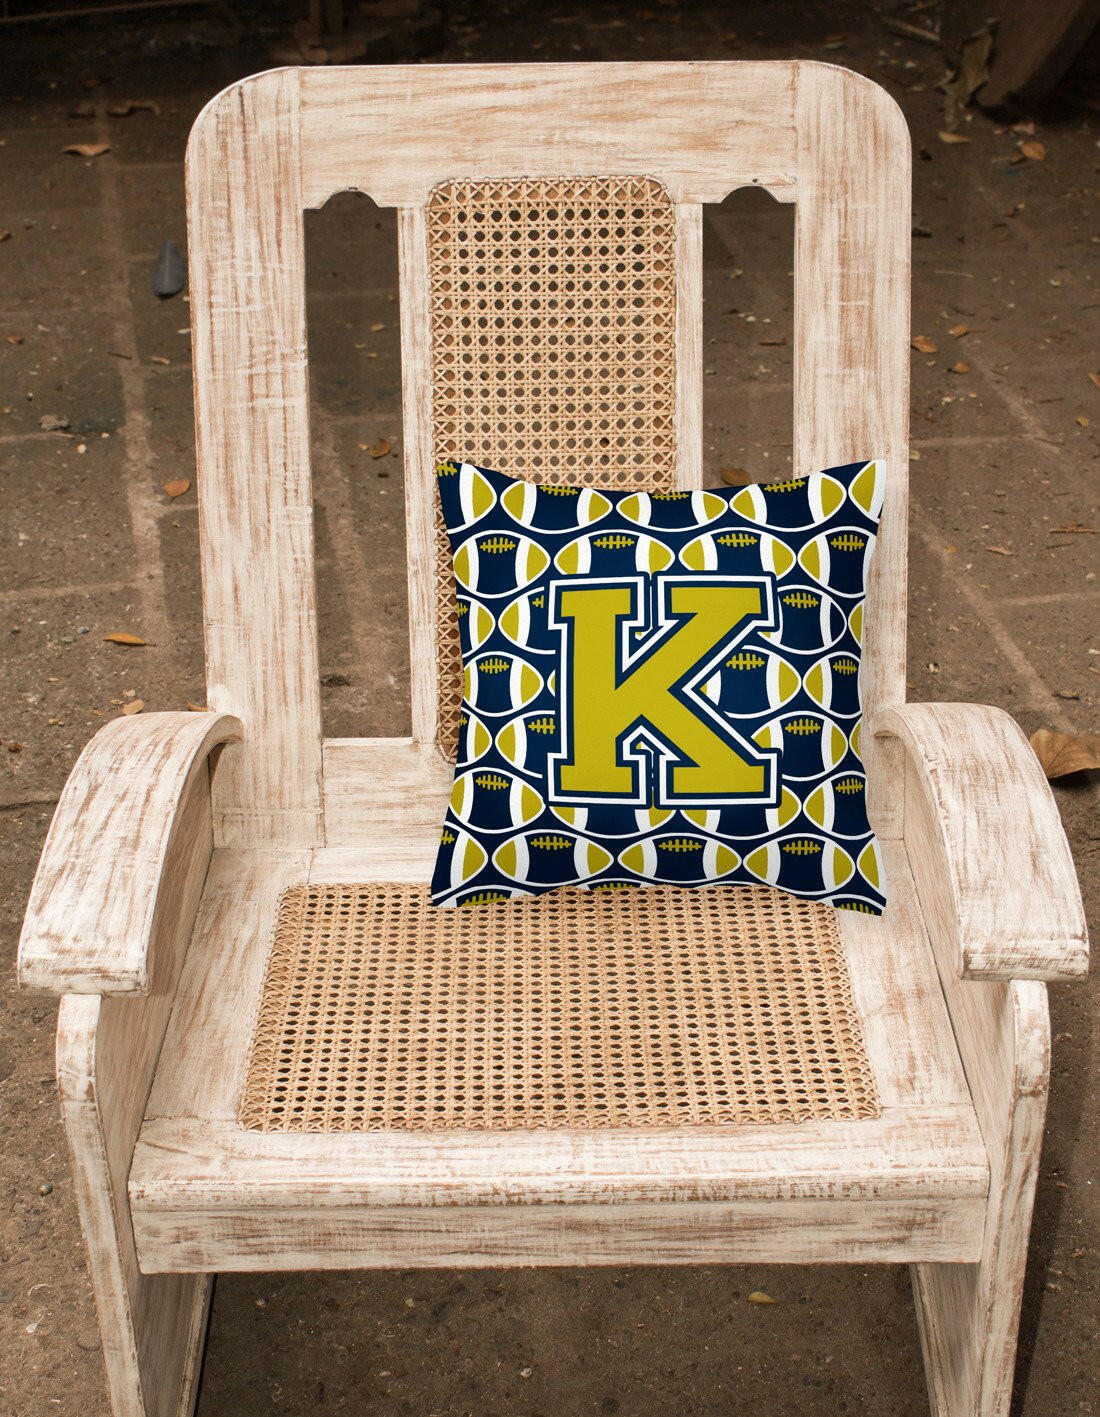 Letter K Football Blue and Gold Fabric Decorative Pillow CJ1074-KPW1414 by Caroline's Treasures